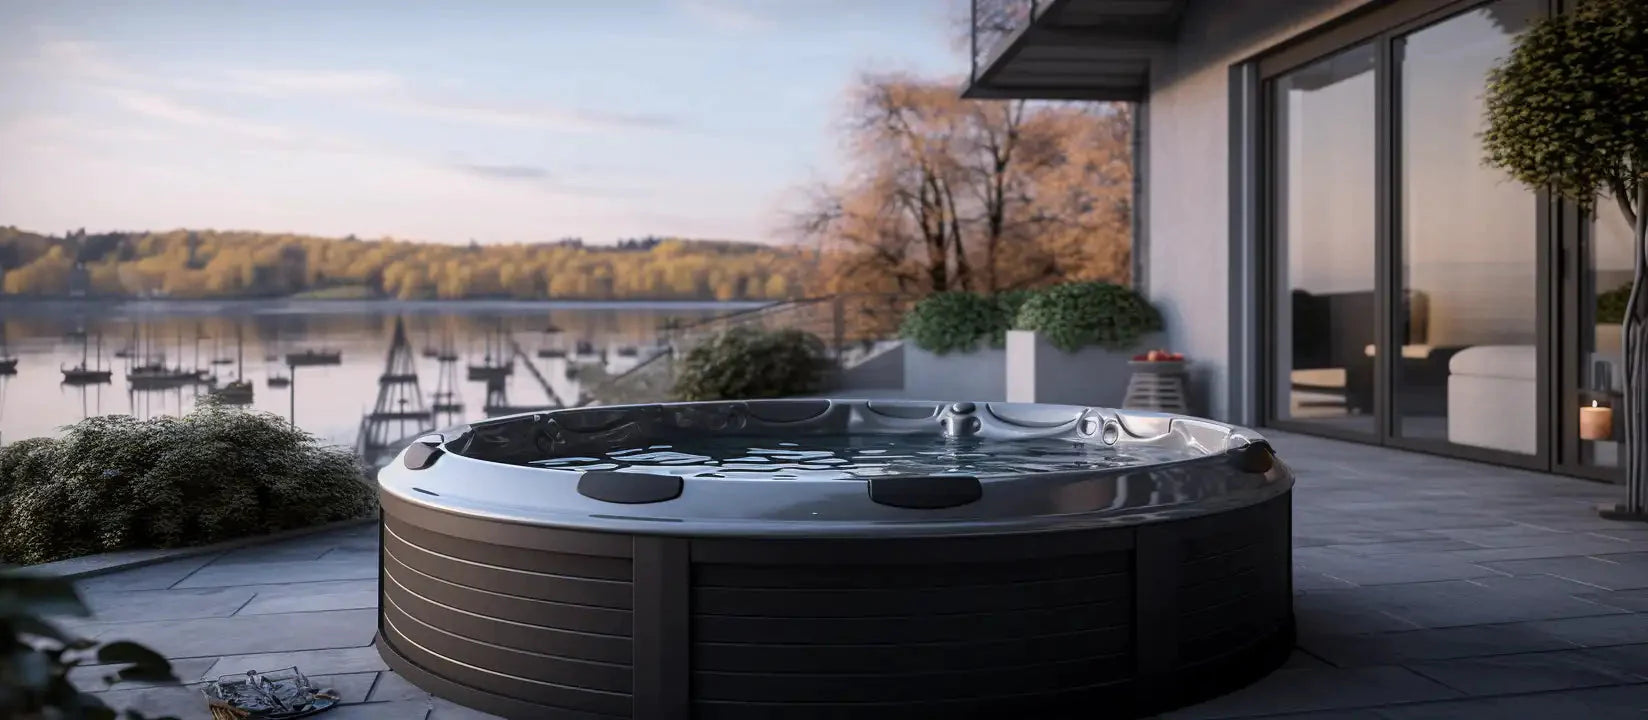 M-Spa Hot tub on a patio overlooking a river with boats and a hilly horizon